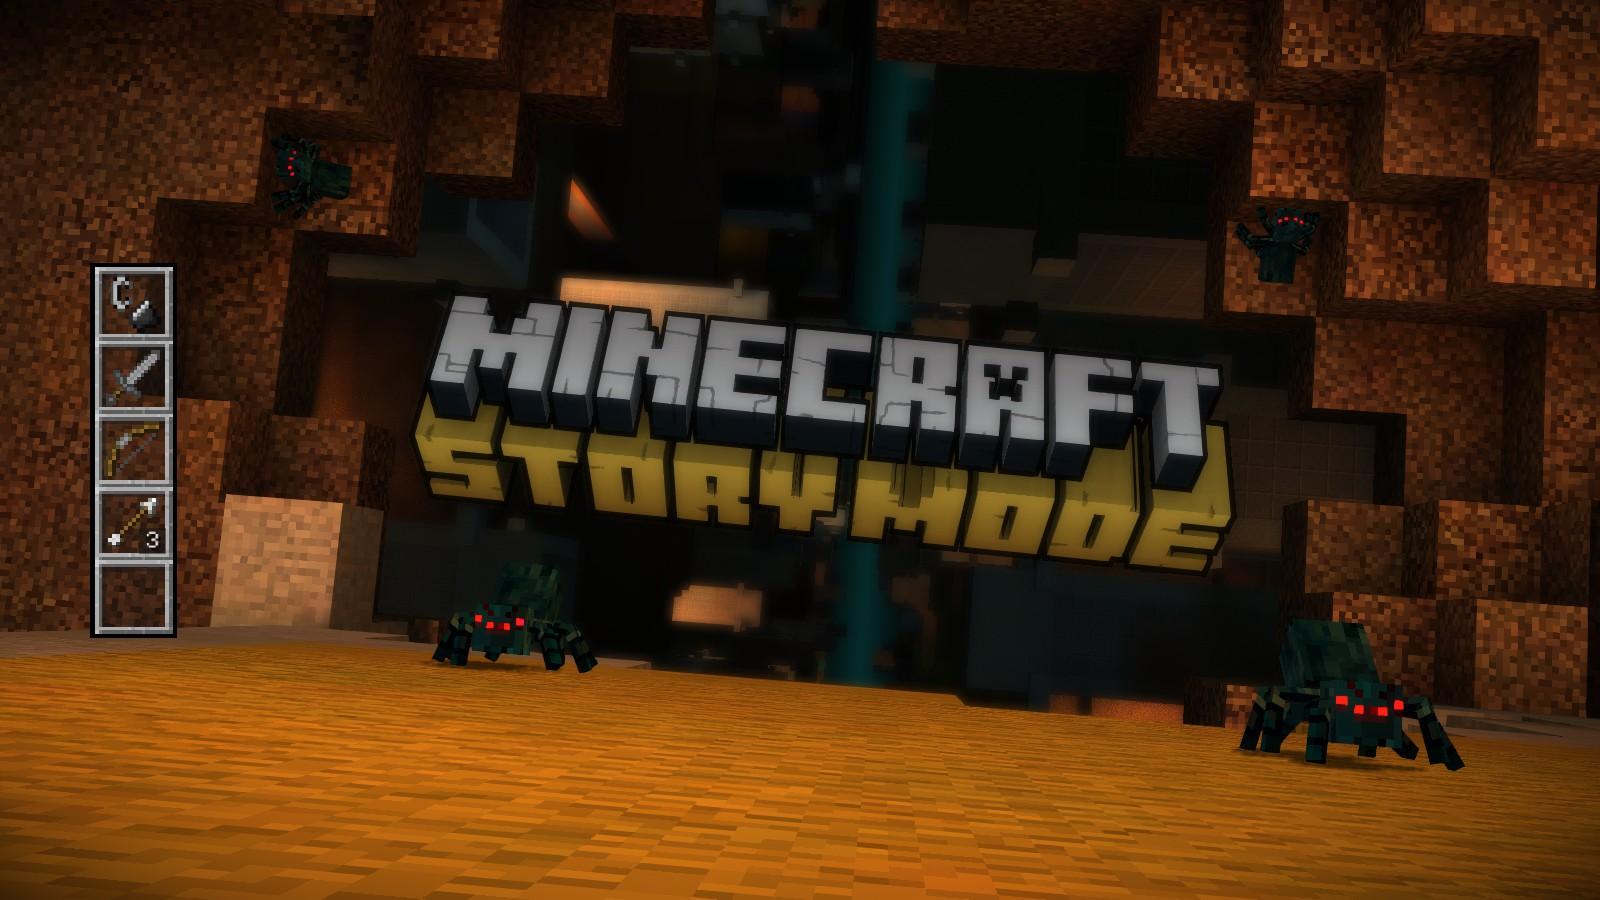 Minecraft: Story Mode Episode 3, 'The Last Place You Look,' is out now on  iOS